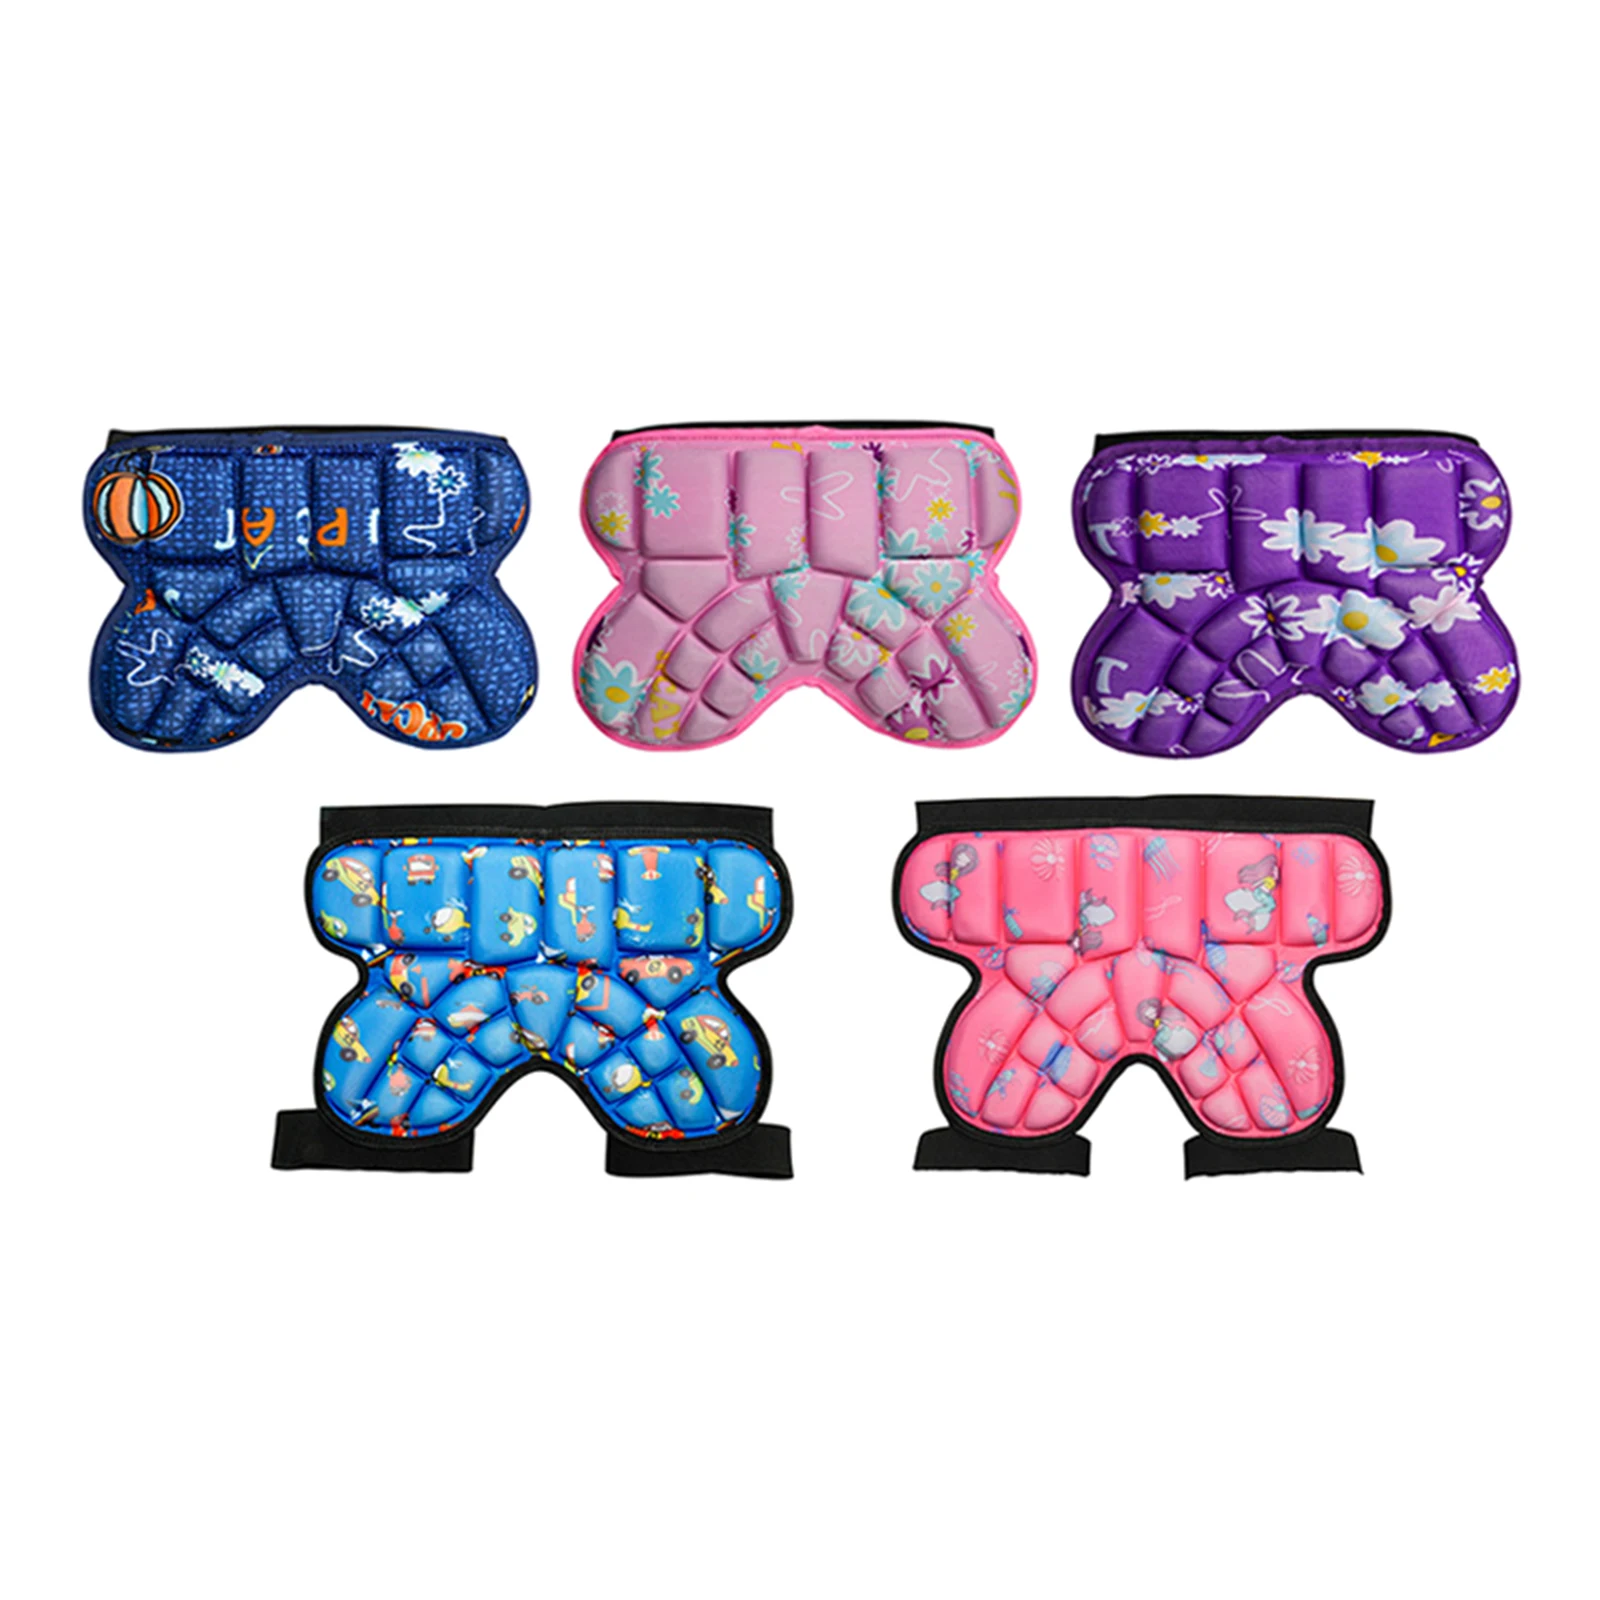 Soft 3D Padded Hip Protective Short Padded Protection Hip Pant Children Butt Pad Guard for ice skating Hockey Soccer Thick